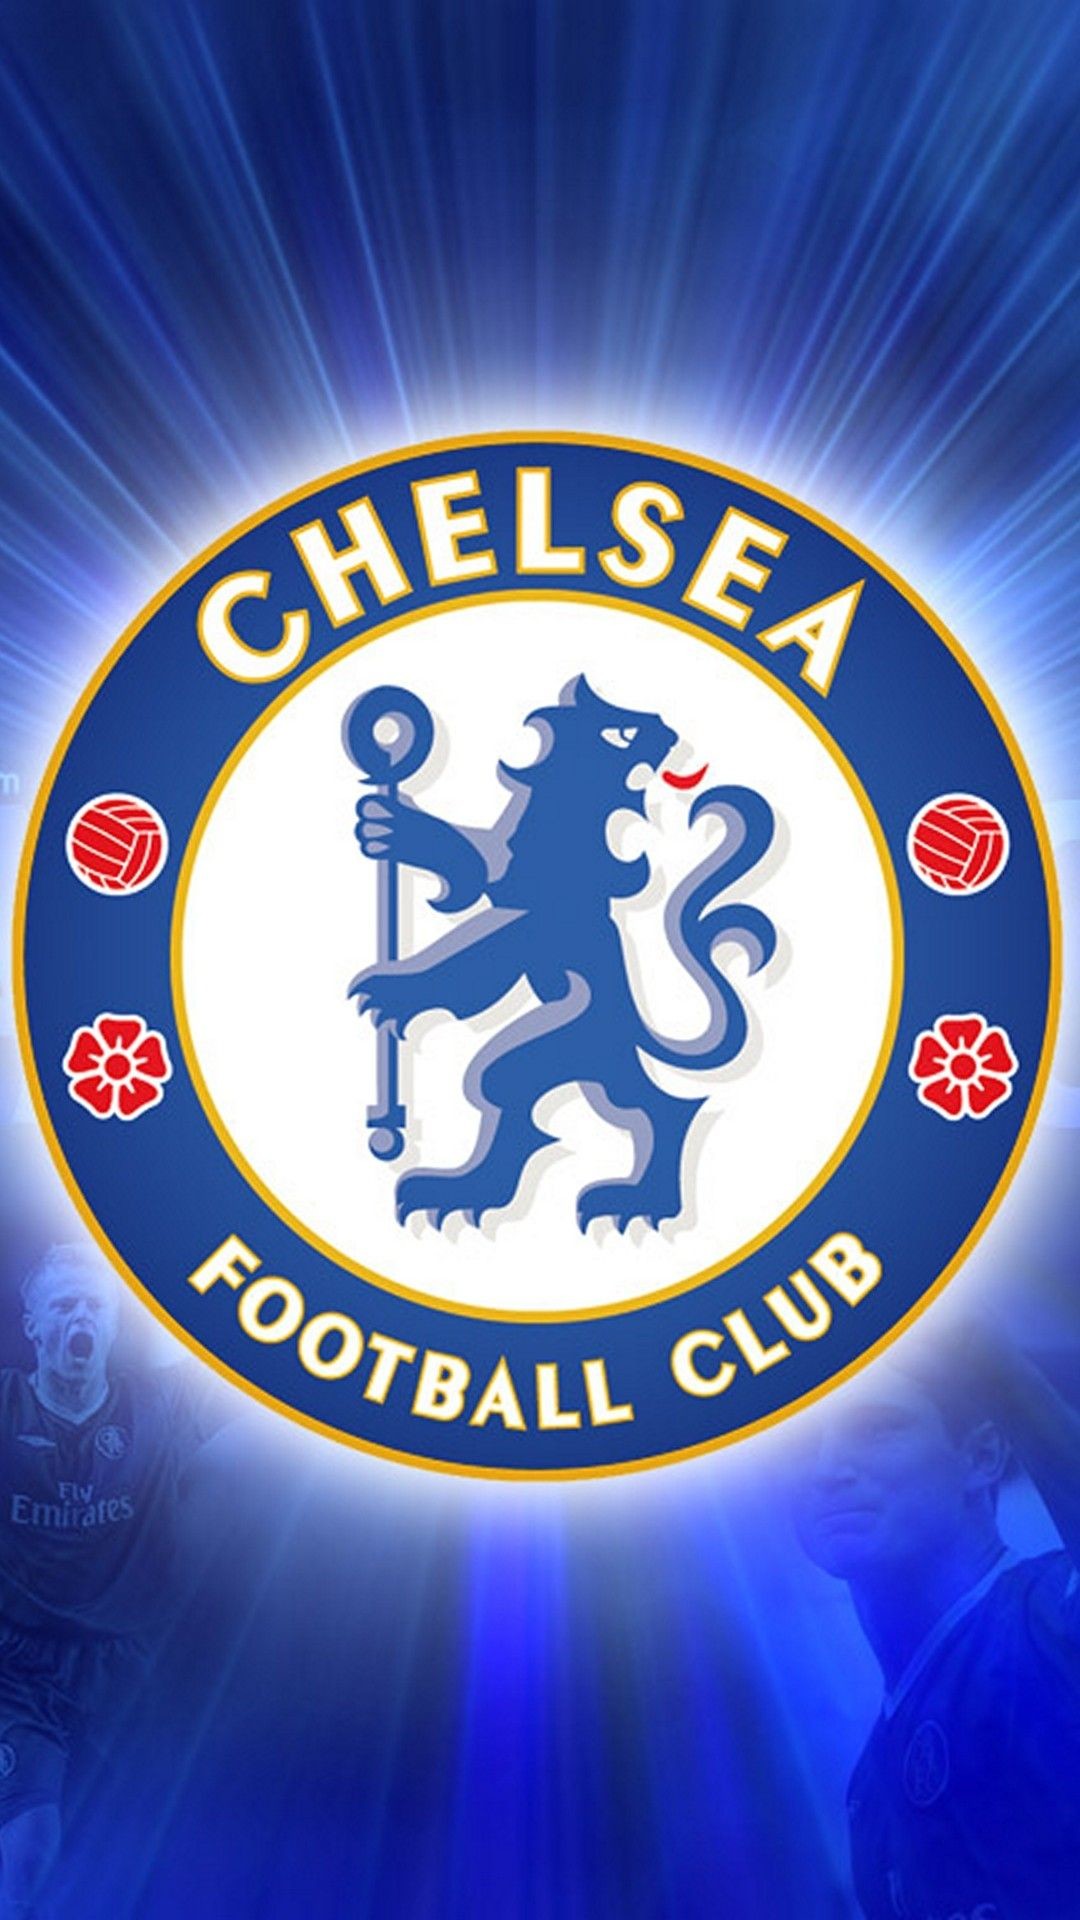 1080x1920 Sports iPhone 6 Plus Wallpapers - Chelsea FC Logo Football iPhone 6 Plus HD  Wallpaper #Football #Sports #iPhone #6 #Plus #Wallpaper